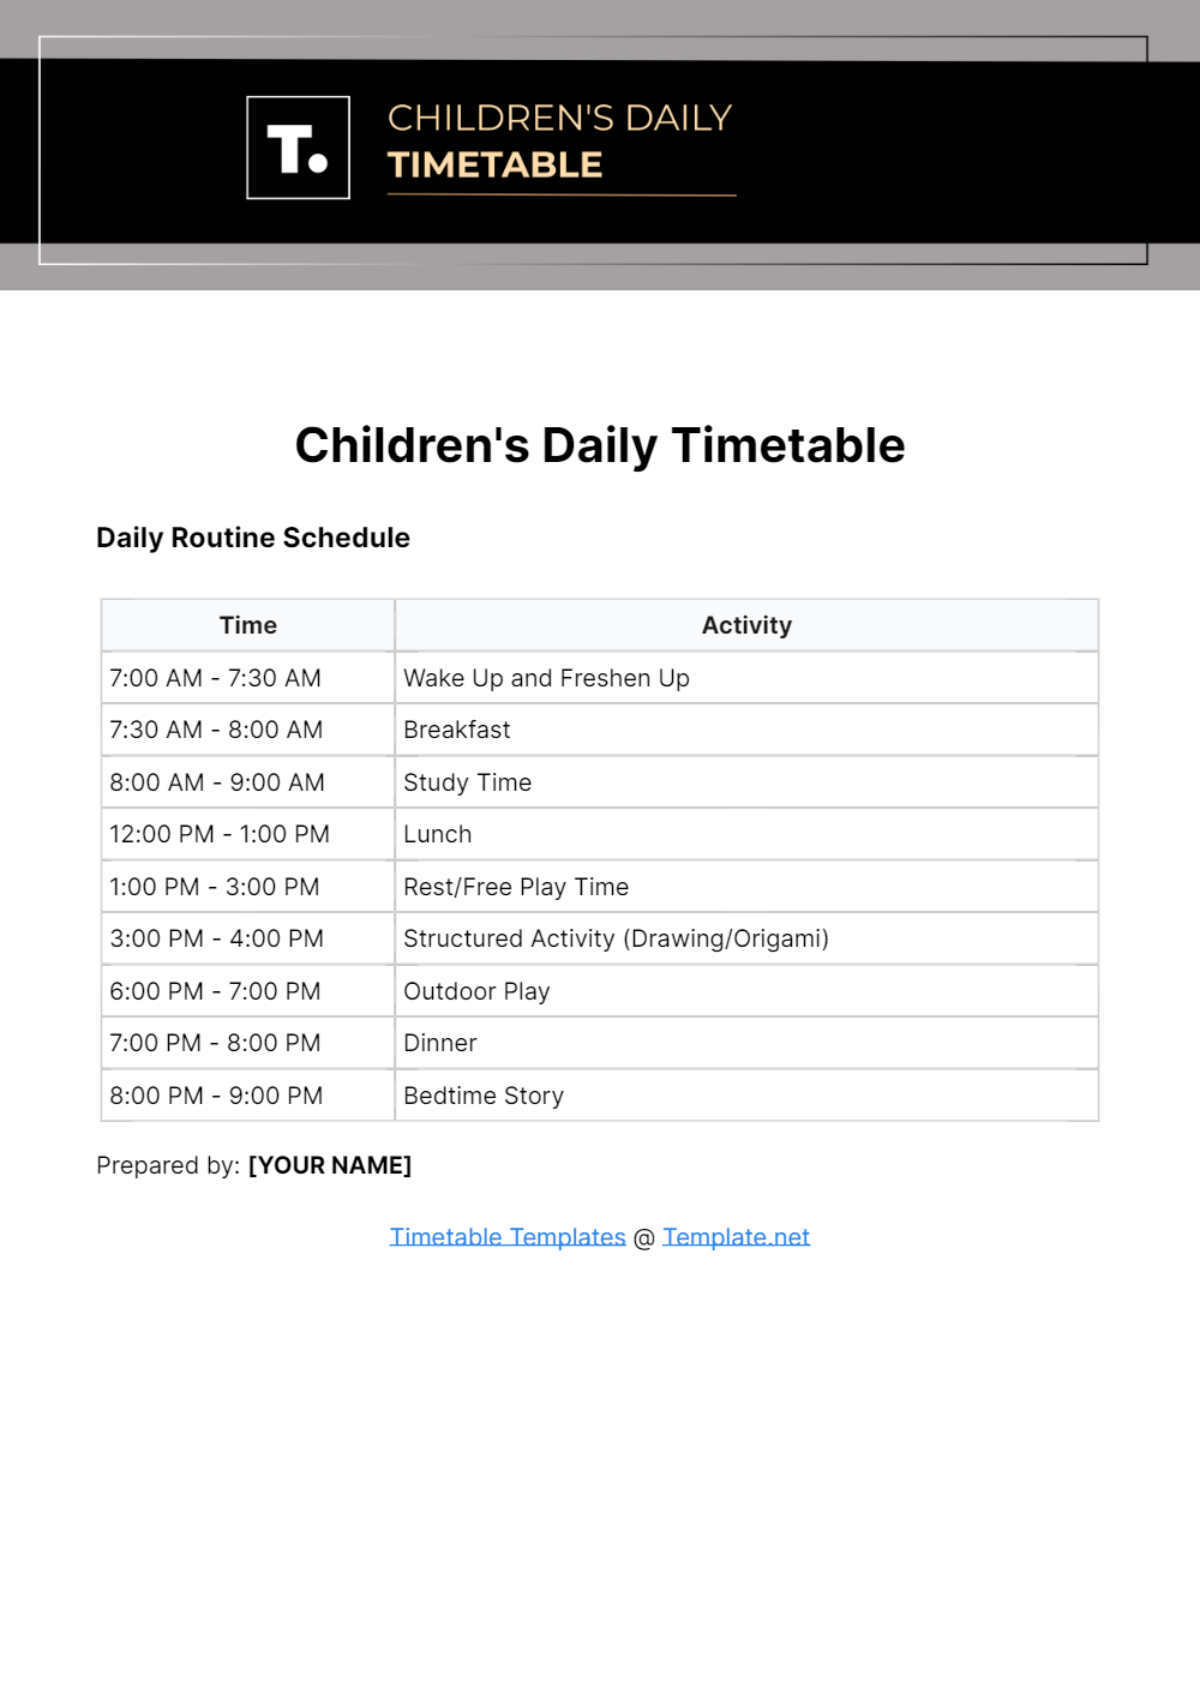 Children's Daily Timetable Template